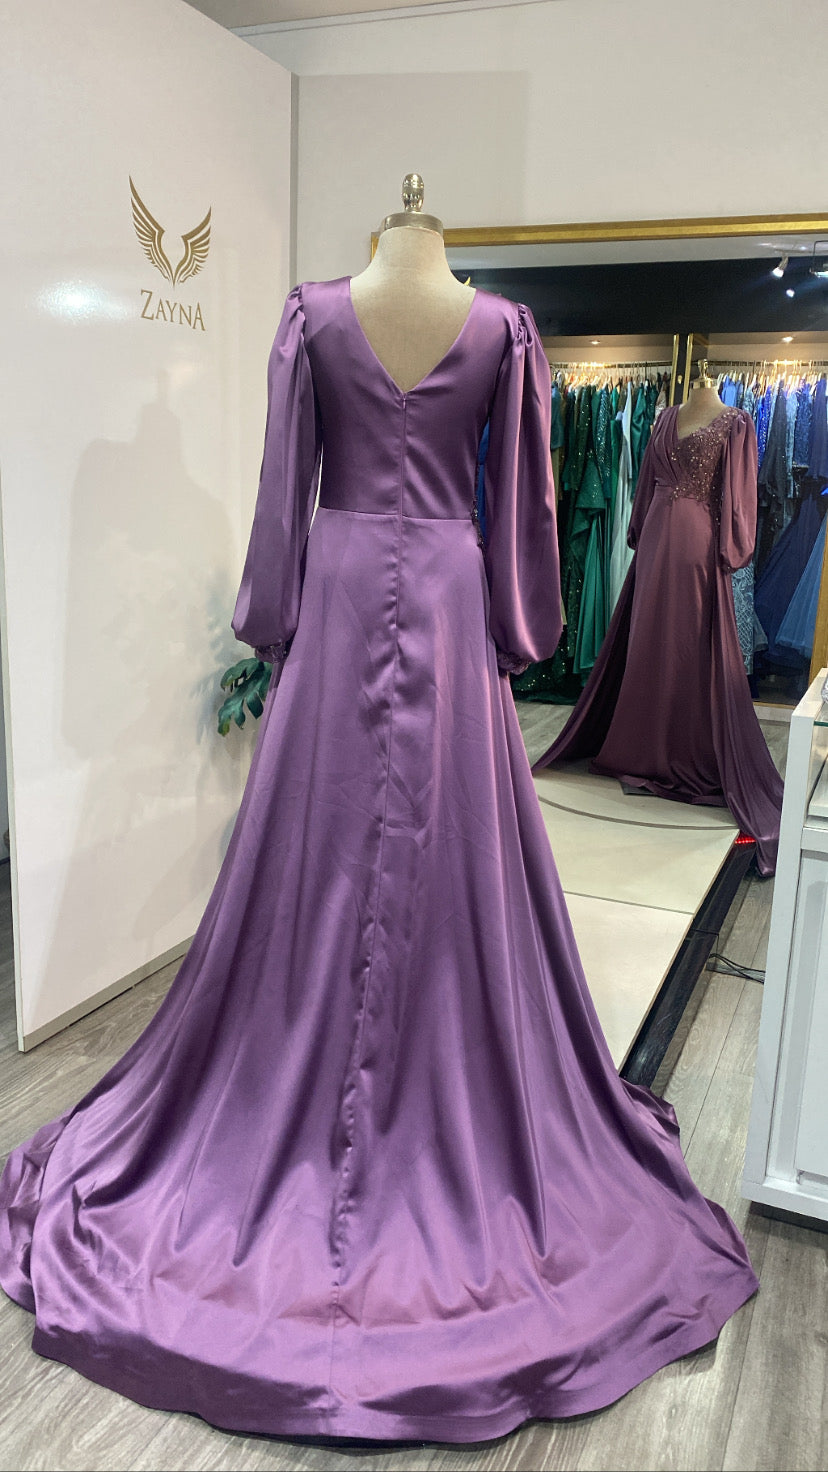 Elegant purple dress with train decorated with beads